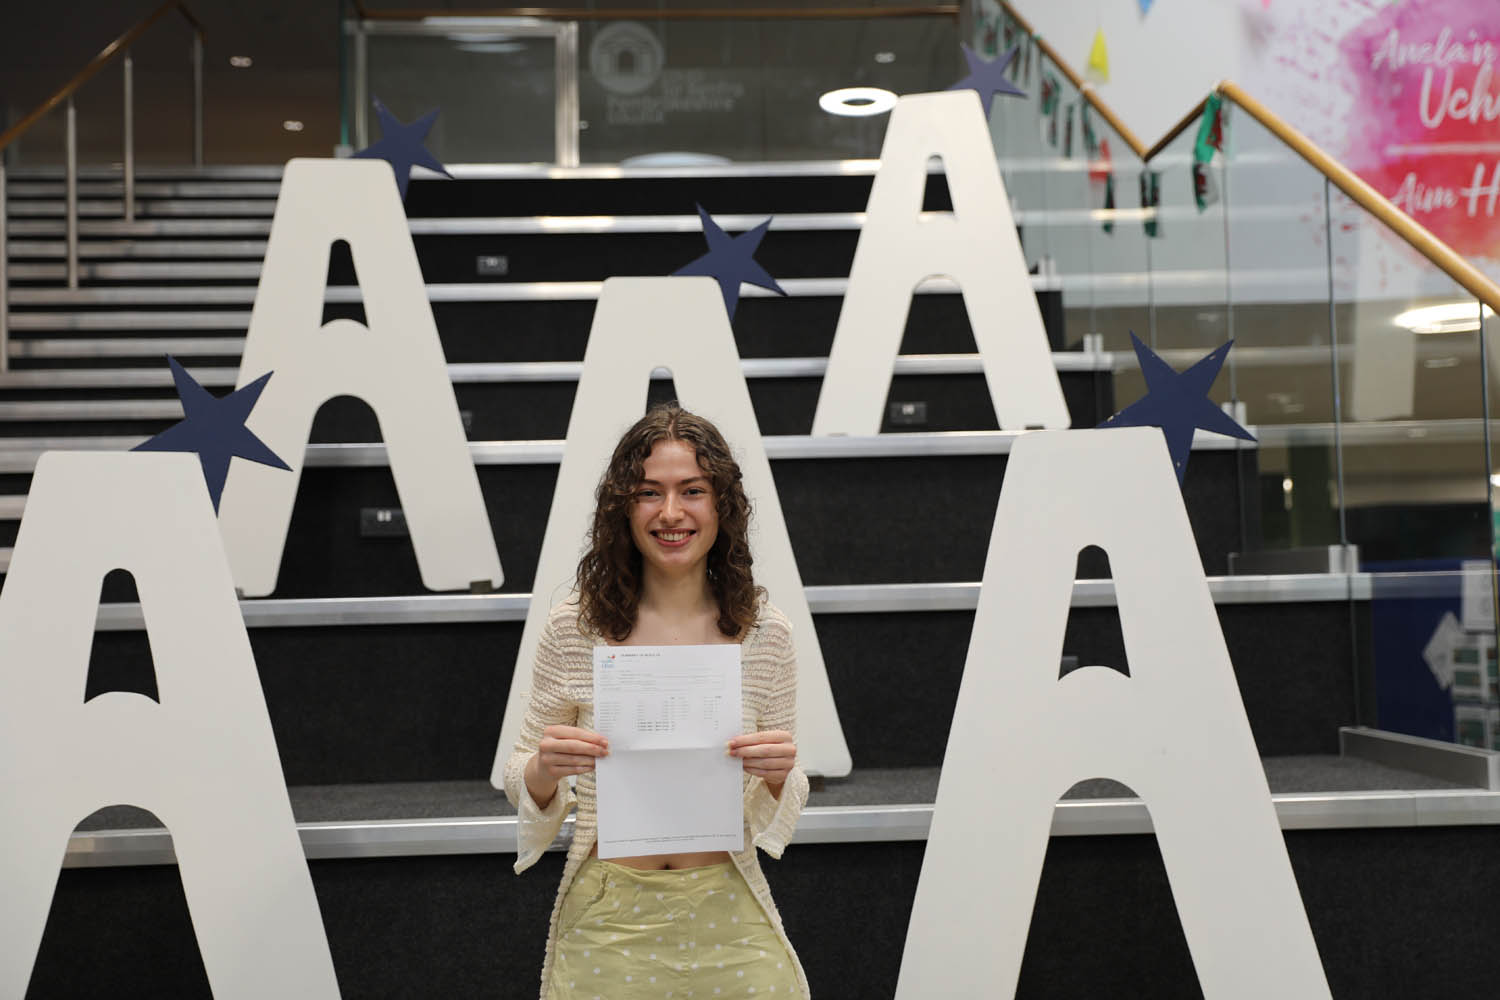 Madeleine Draycott holding results, large a's in background on stairs.